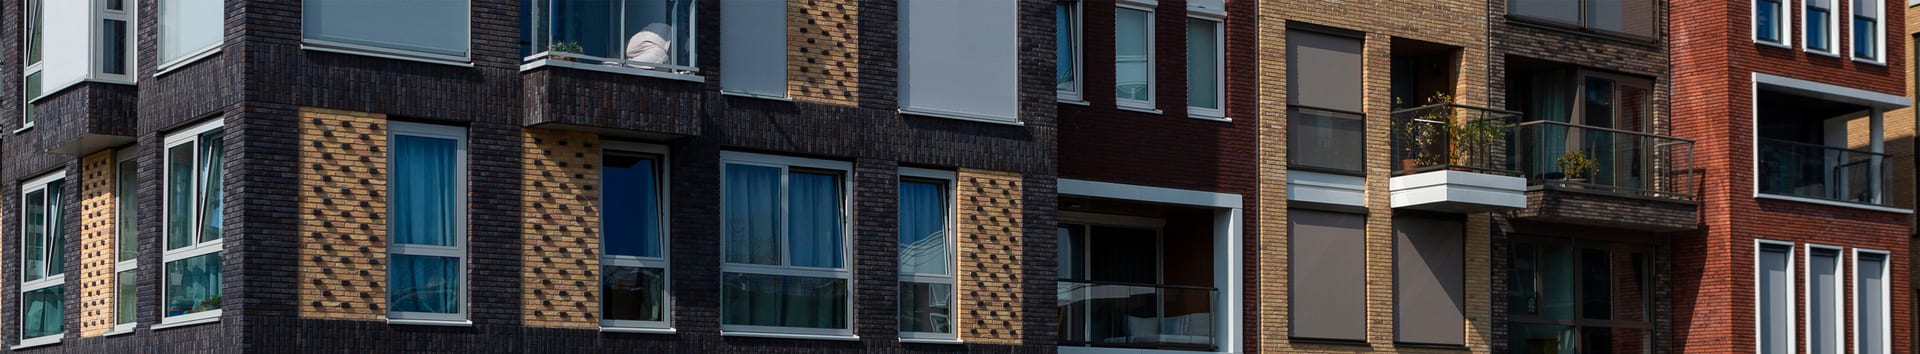 closeup of windows on an older apartment building featuring different types of brick styles